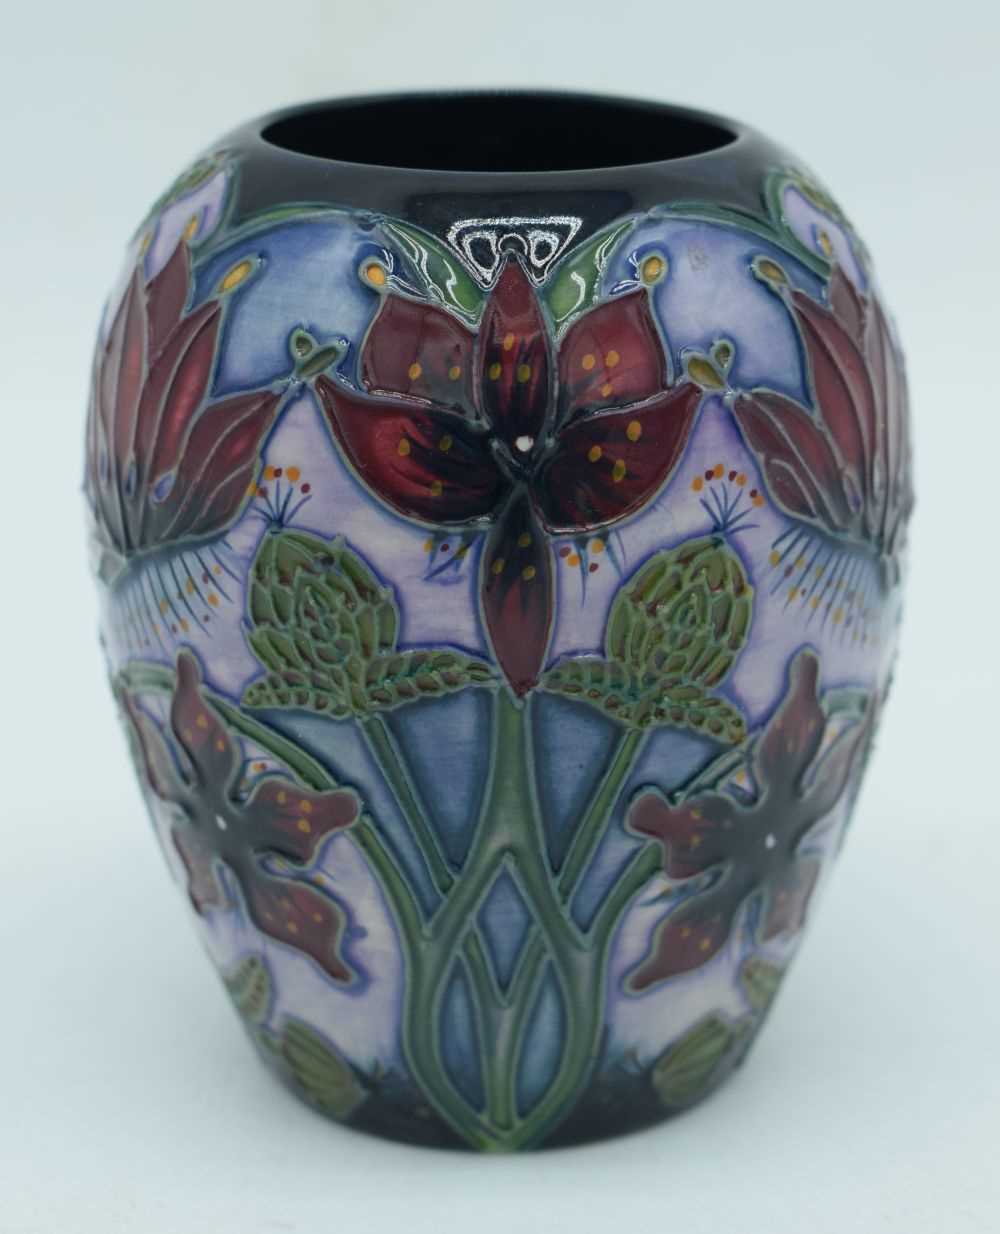 Moorcroft Pottery Vase in the Delonix Pattern, Designed by Shirley Hayes 2003. 9 x 7cm - Image 4 of 8